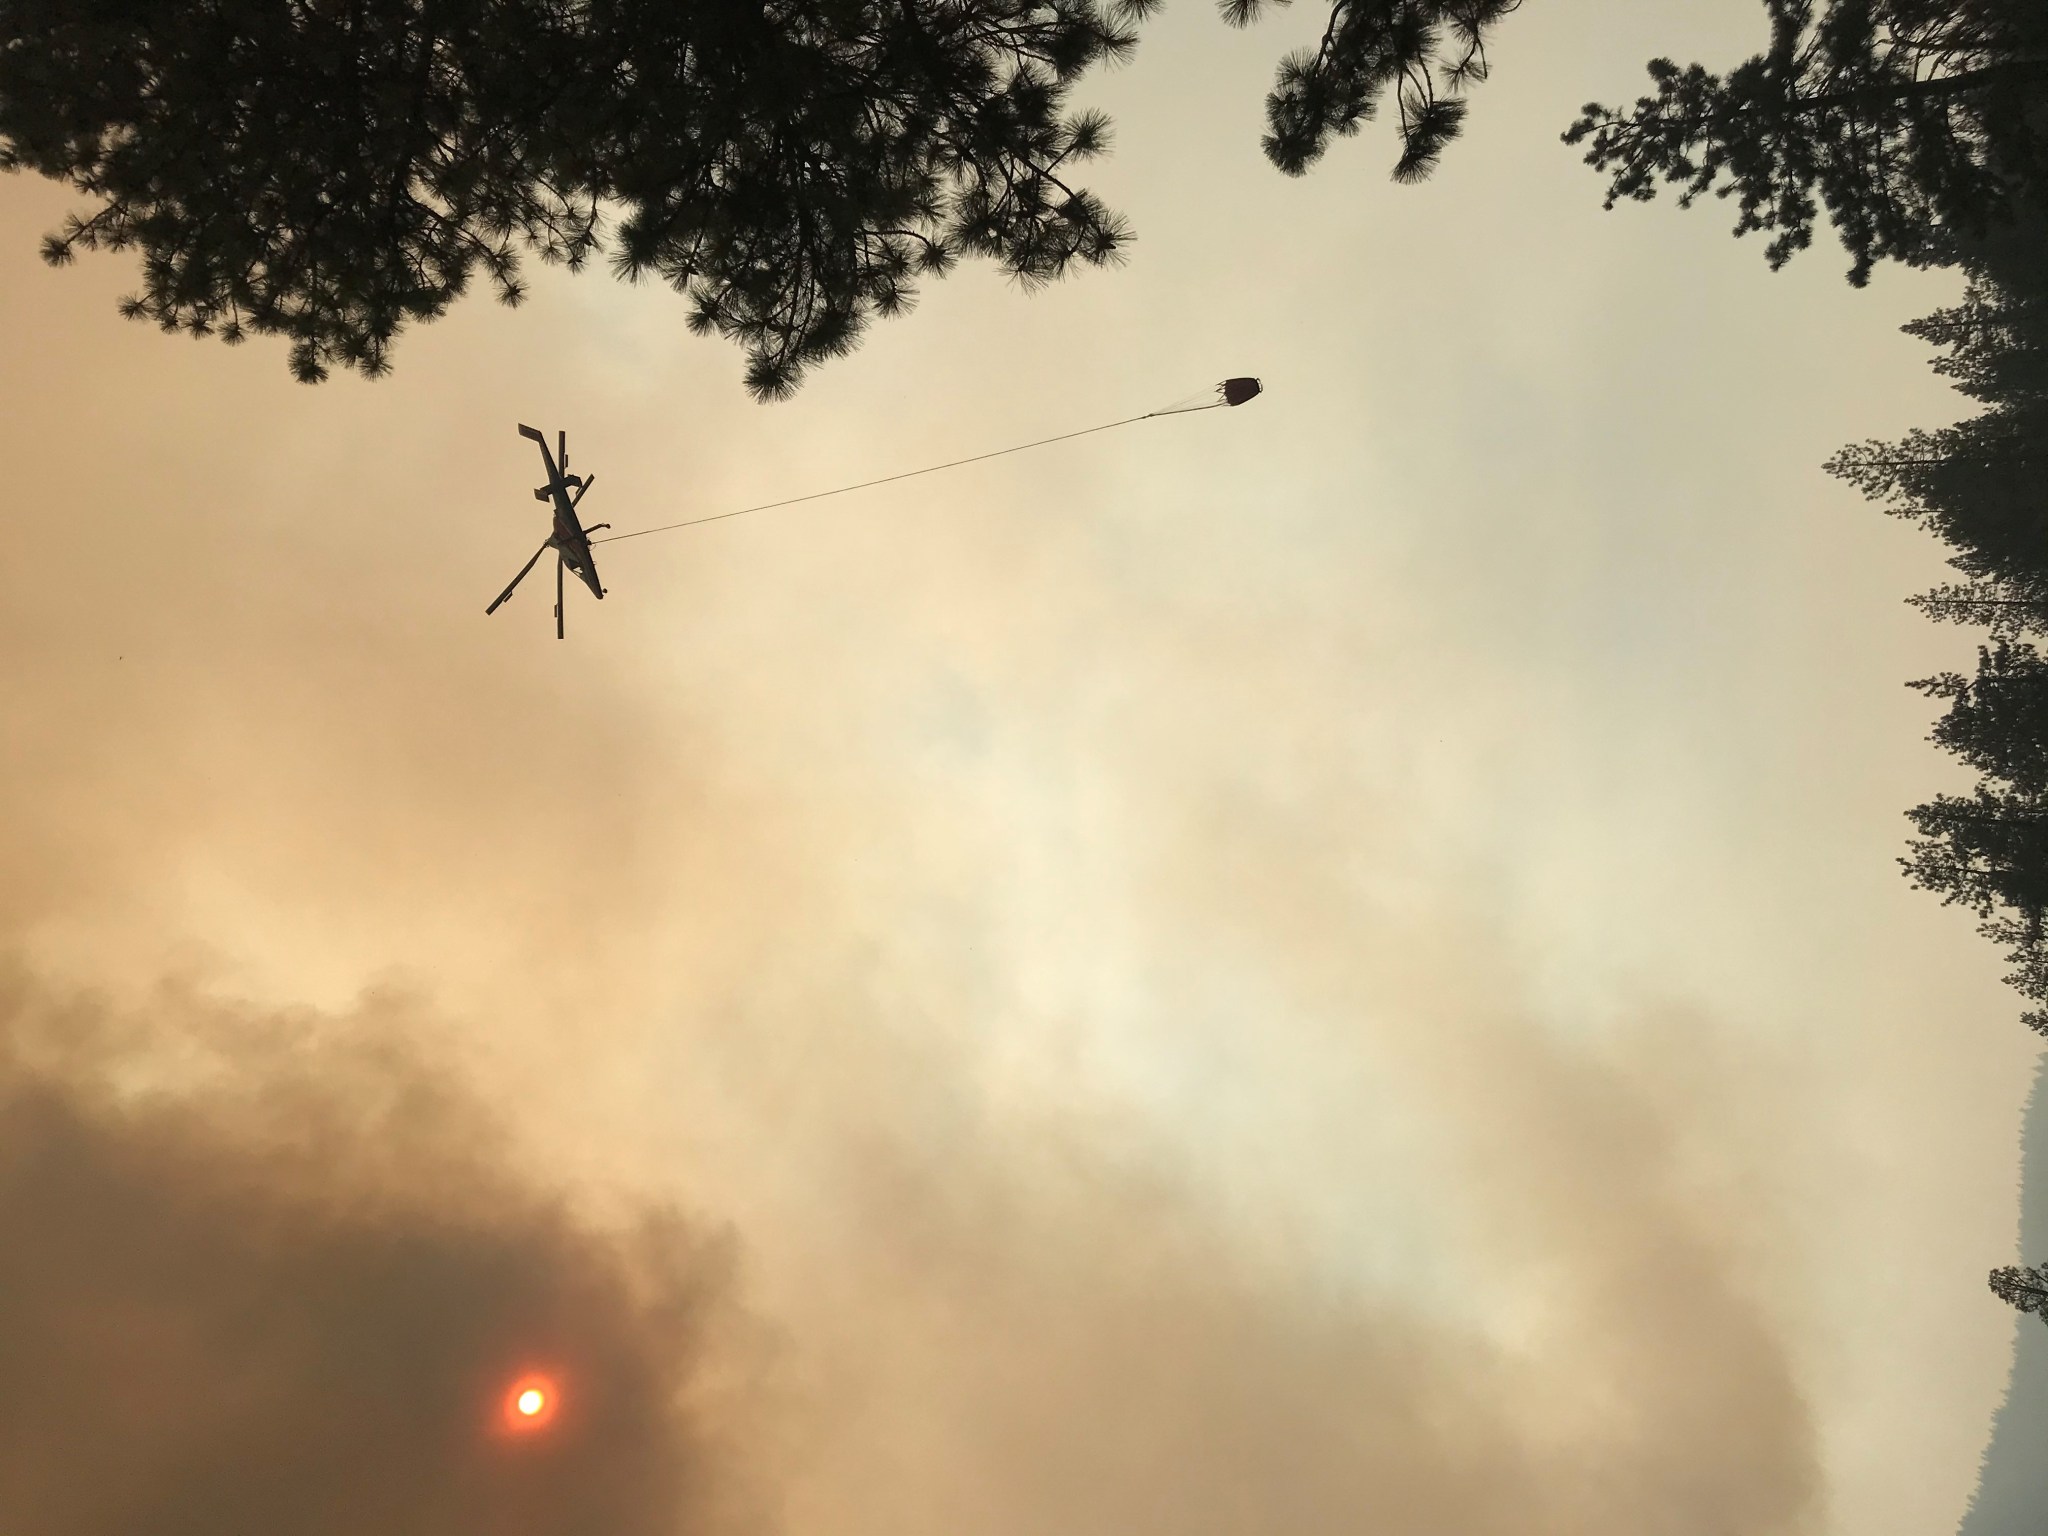 A helicopter carrying a bucket in a smoky sky